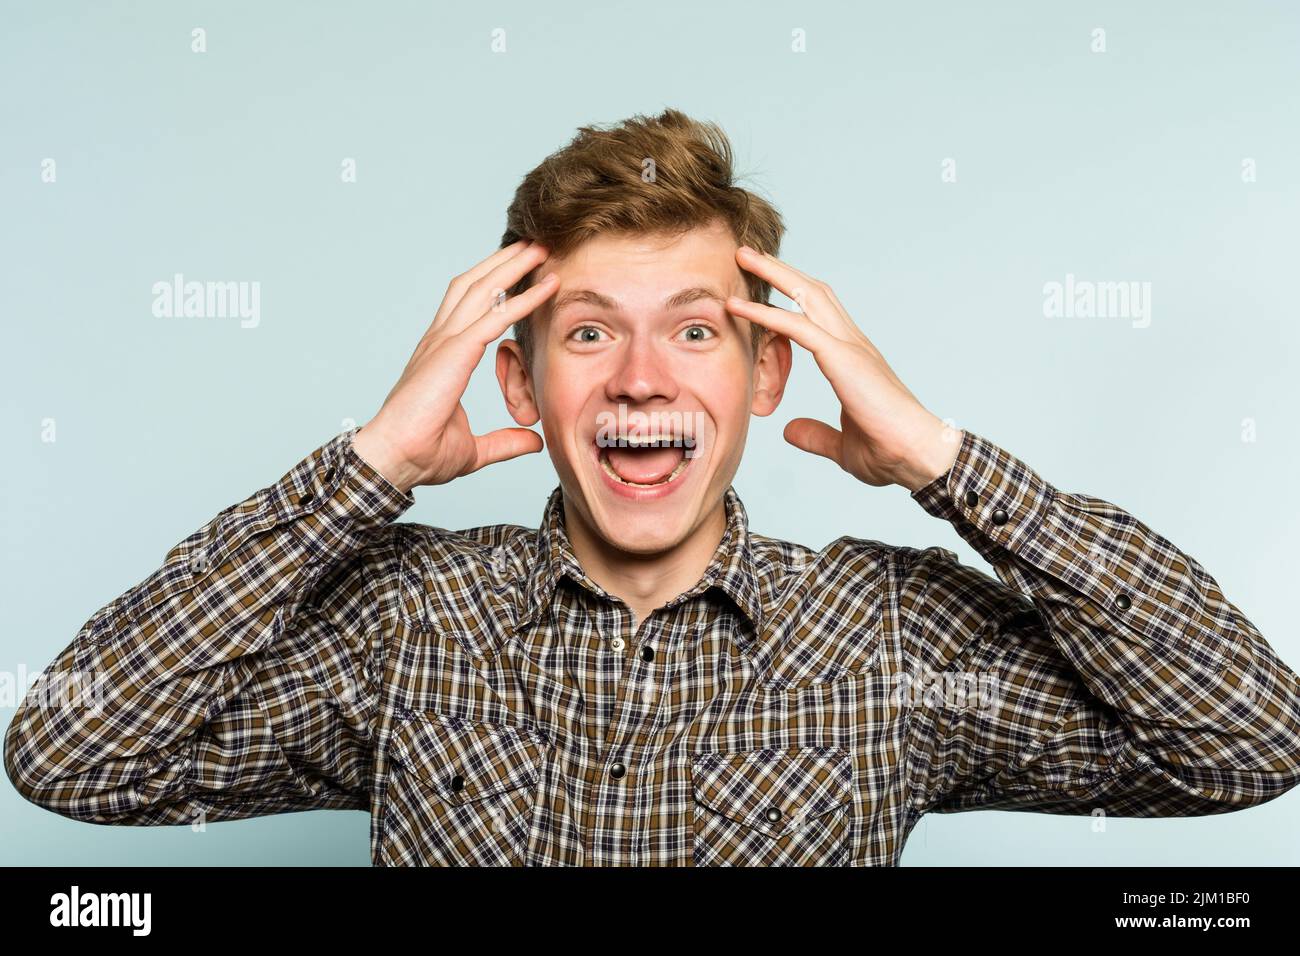 crazy happy overexcited mad wild man wide grin Stock Photo